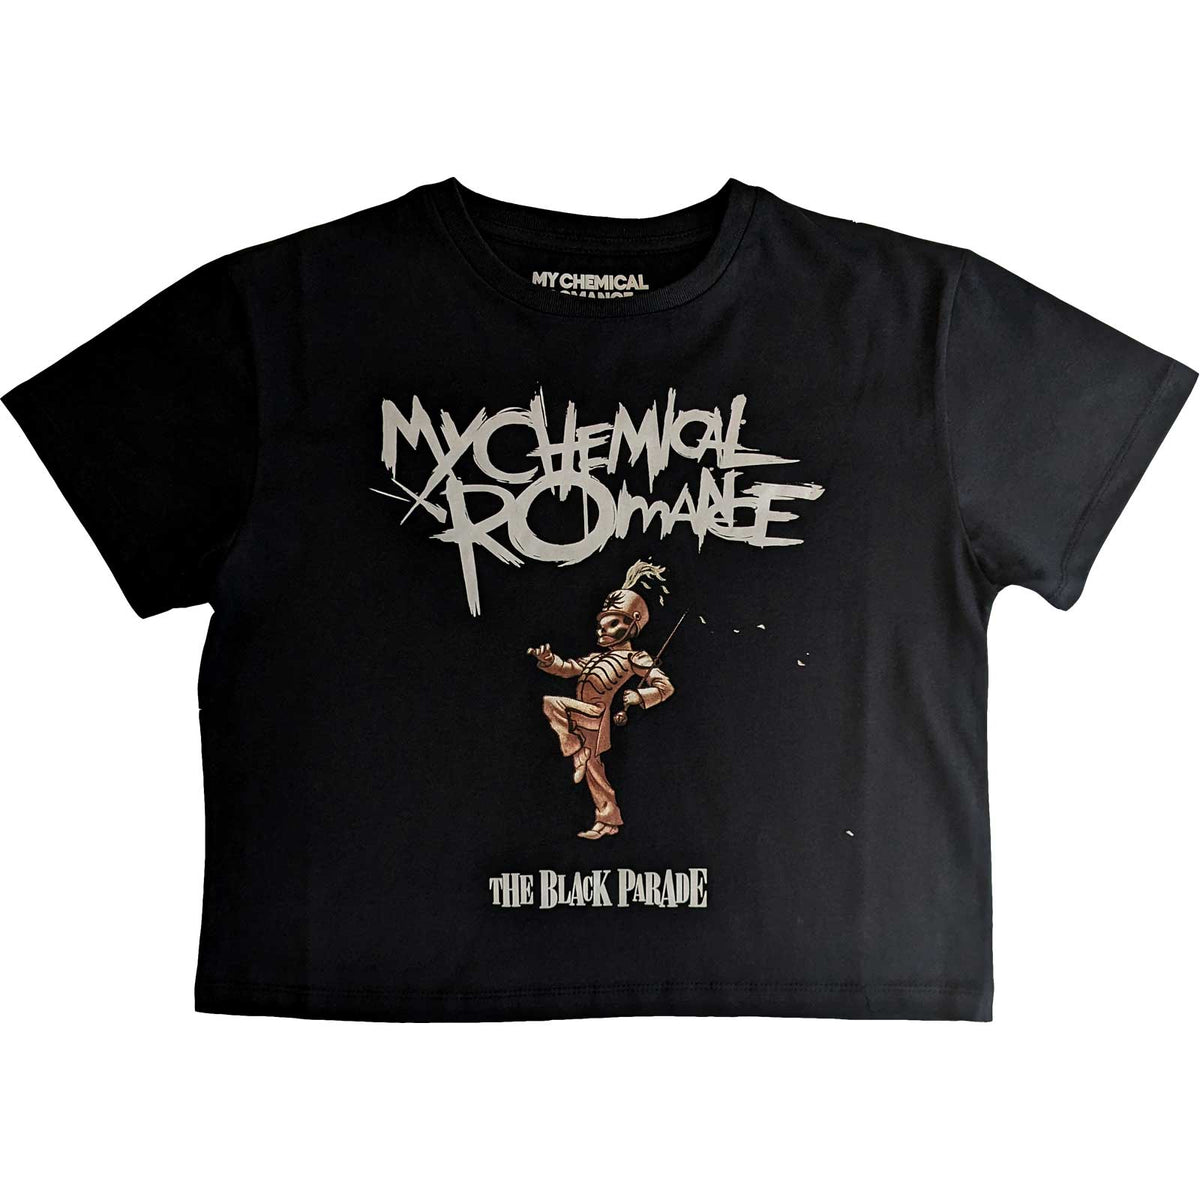 My Chemical Romance Ladies Crop Top - The Black Parade - Official Licensed Design